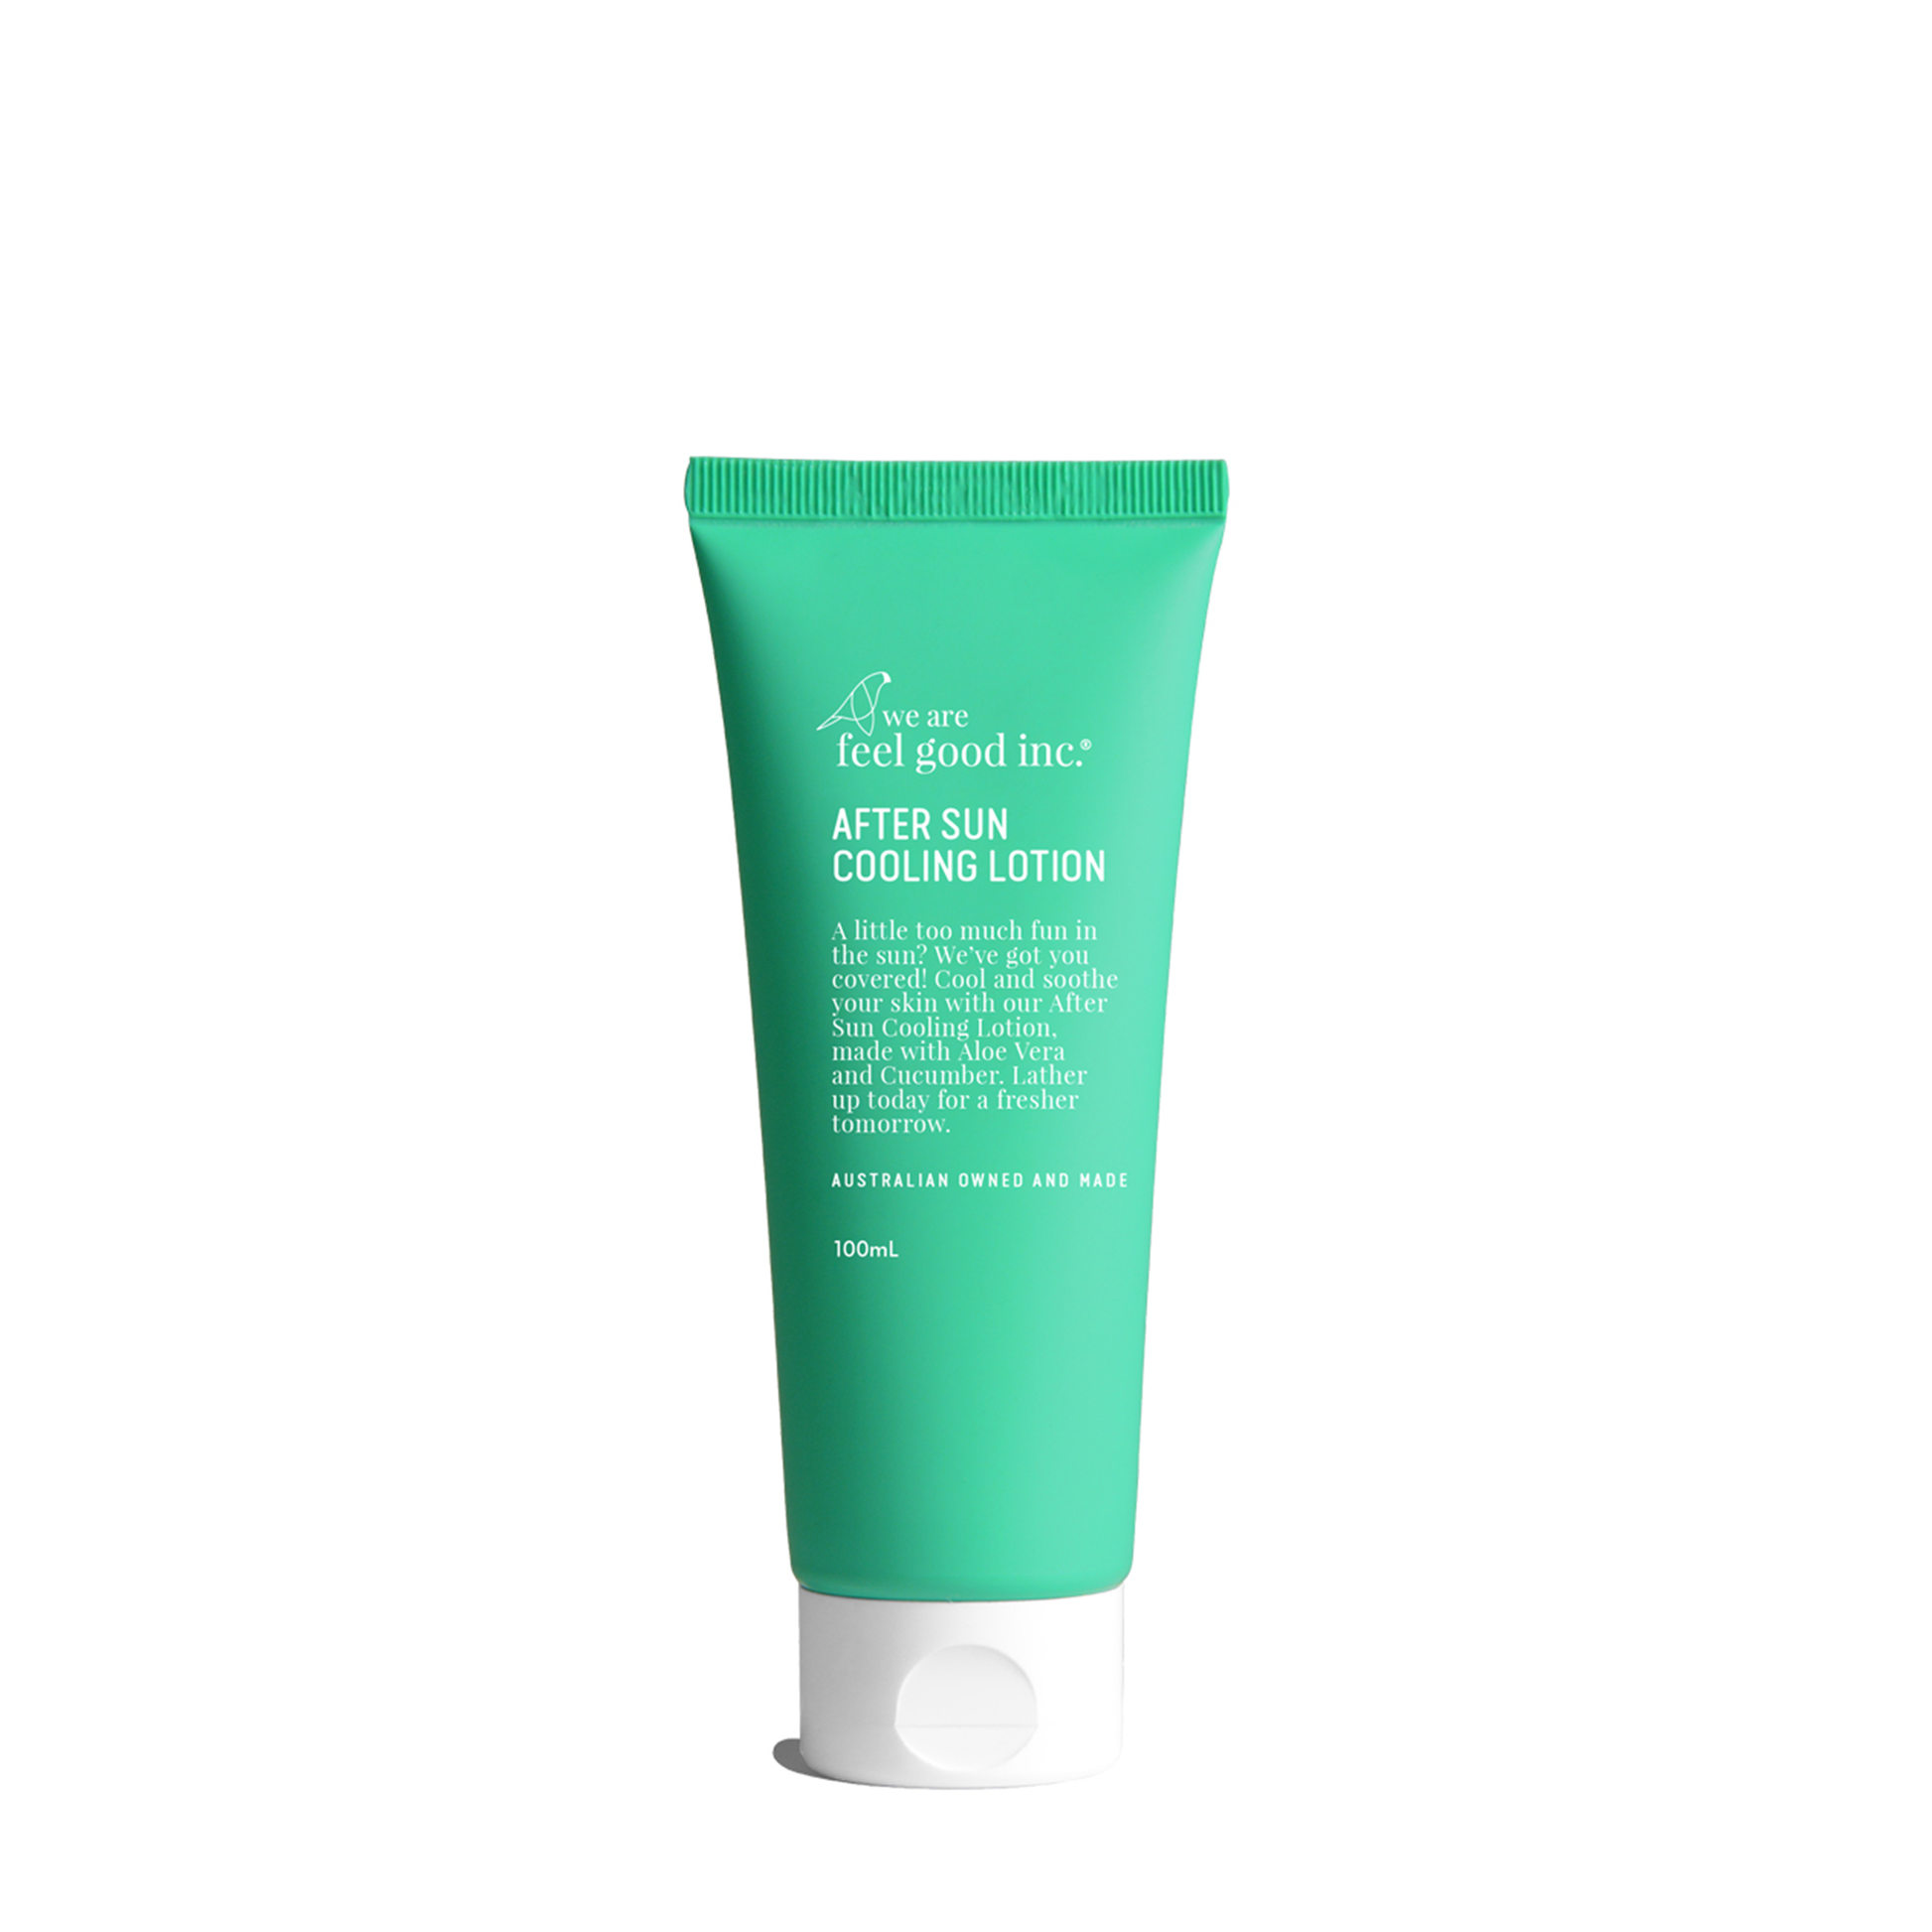 A 100ml green tube of 'We Are Feel Good Inc. After Sun Cooling Lotion